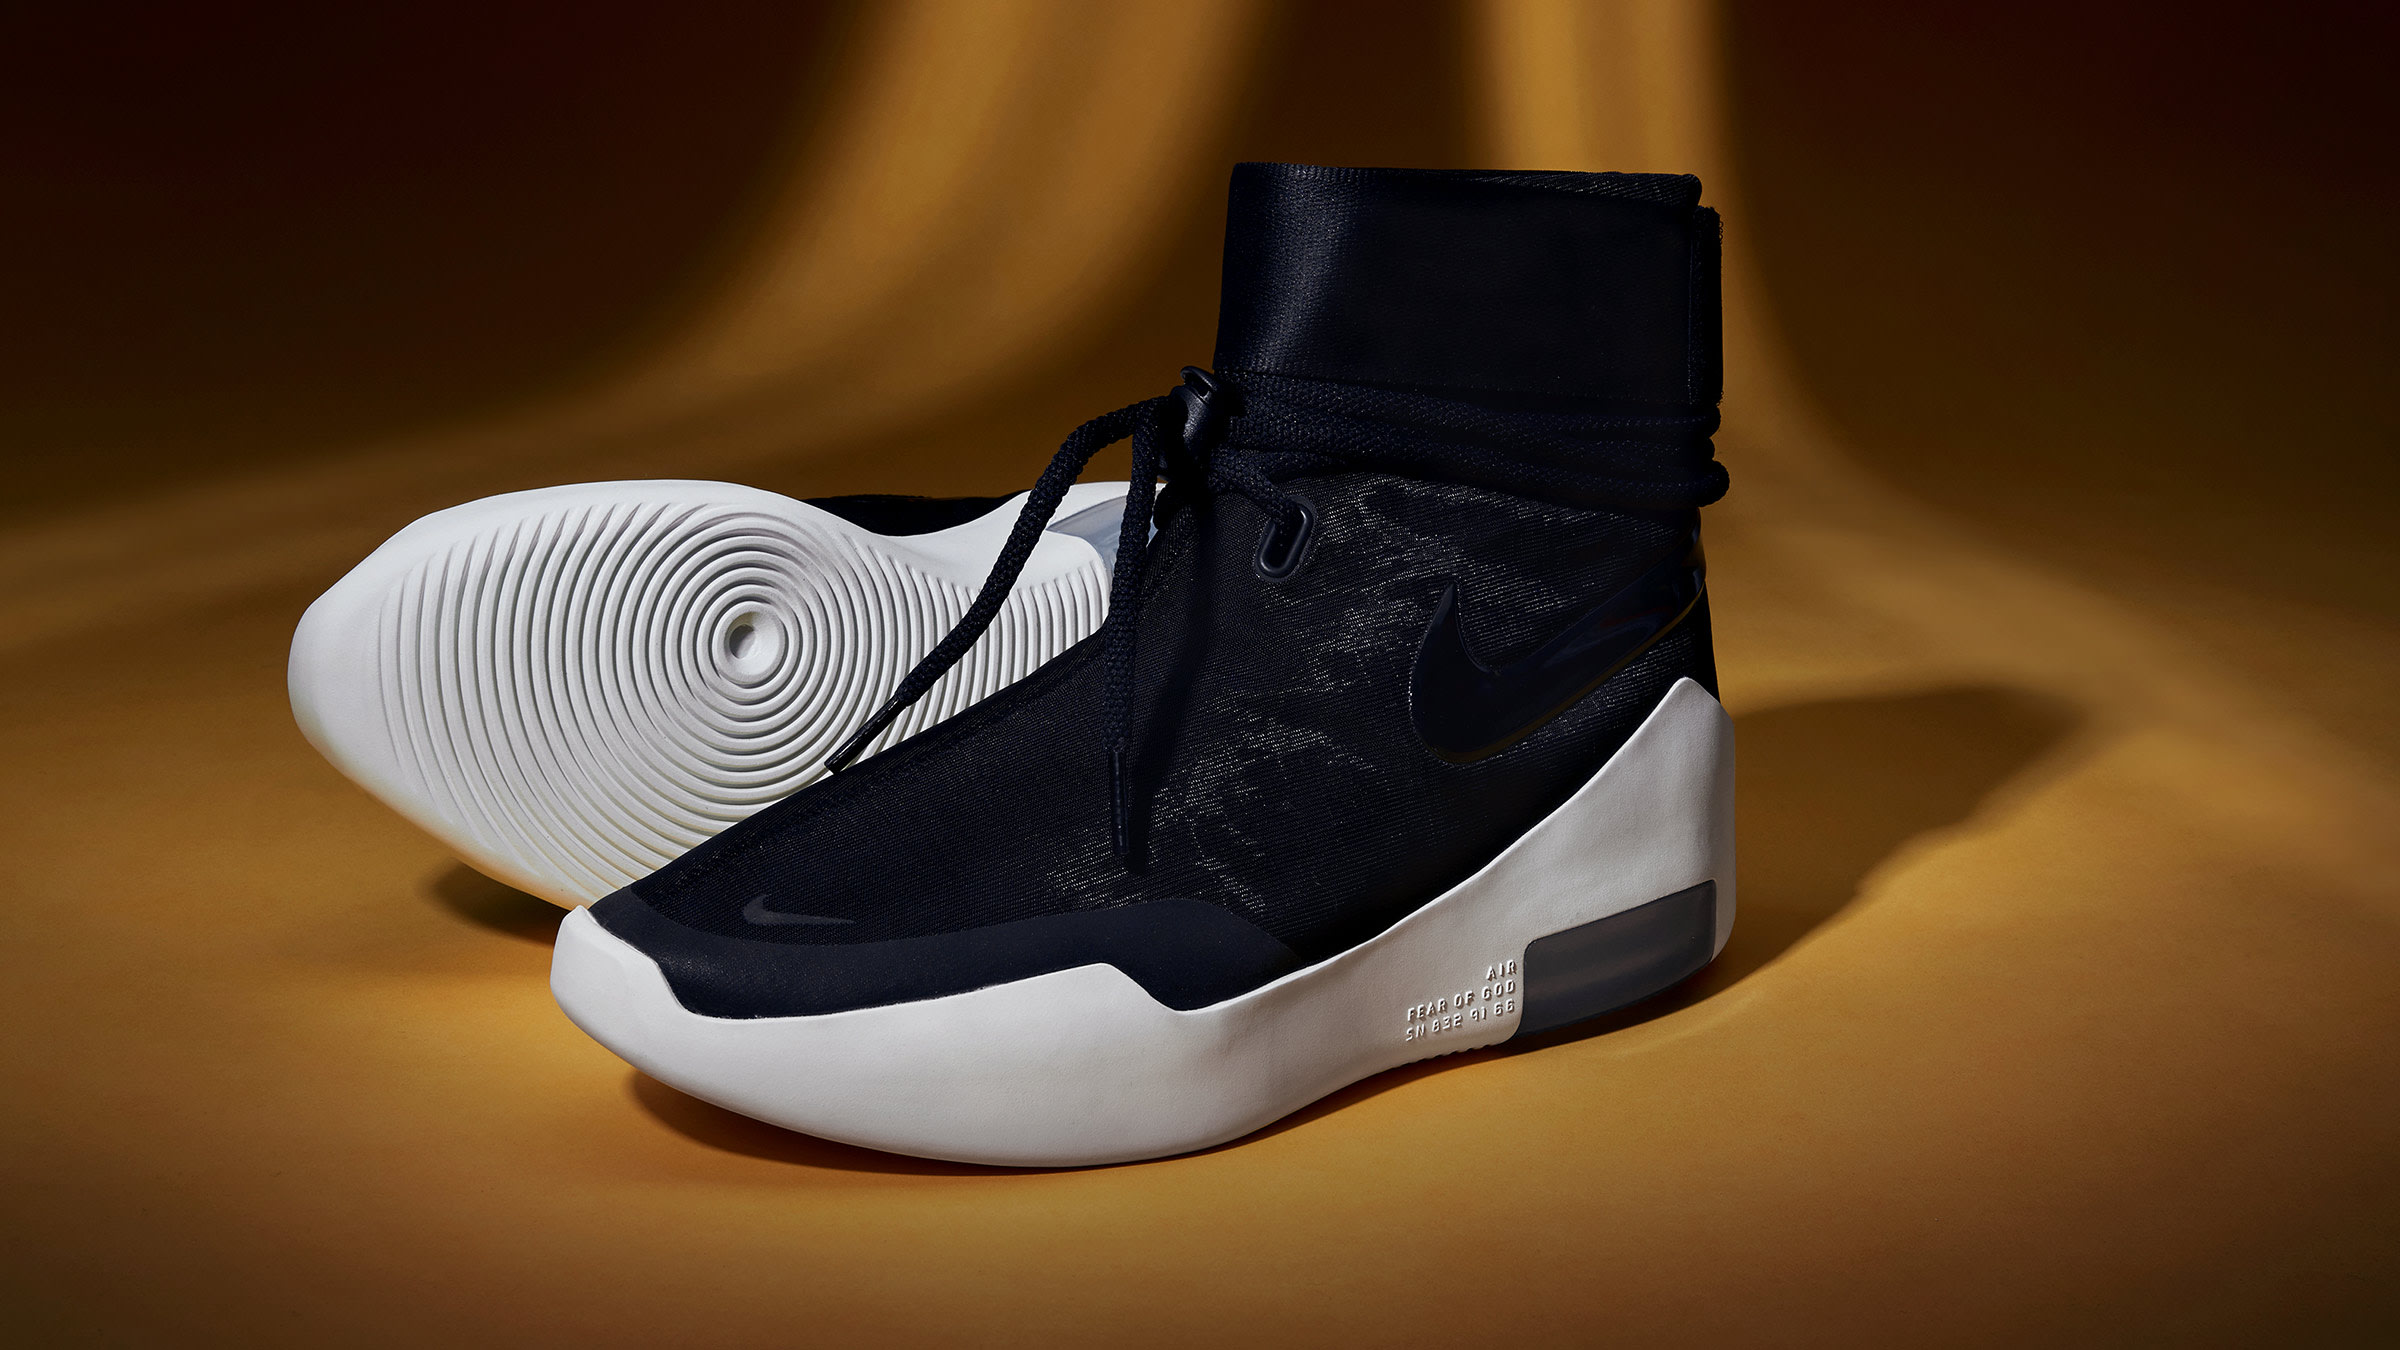 Nike x Fear Of God Air Shoot Around (Black) | END. Launches